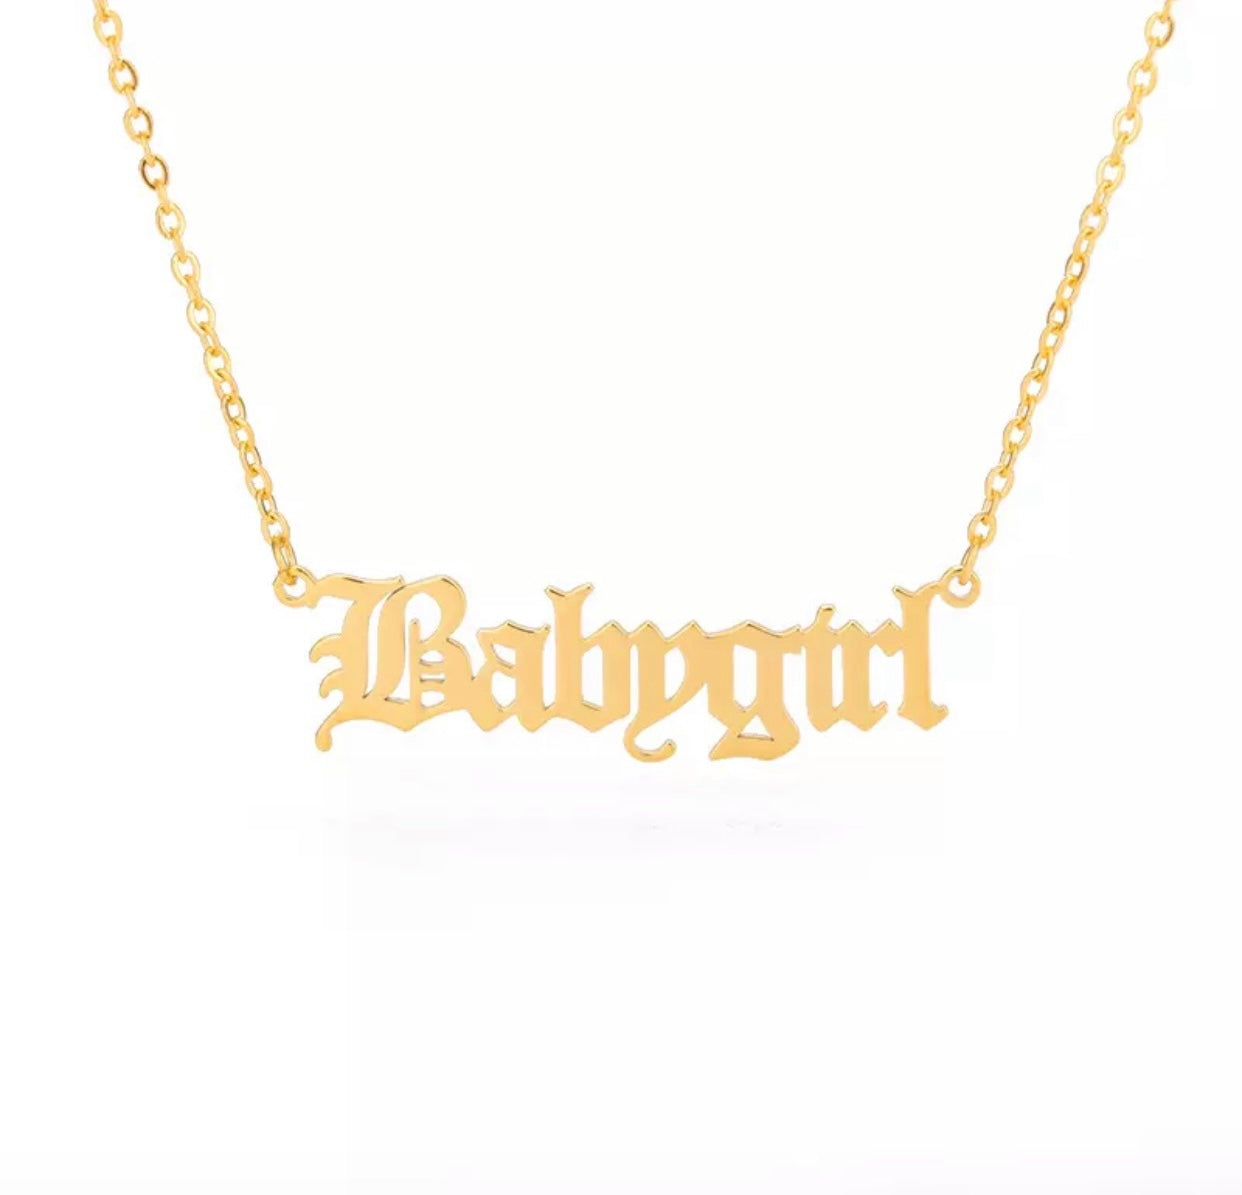 Babygirl Necklace Stainless Steel